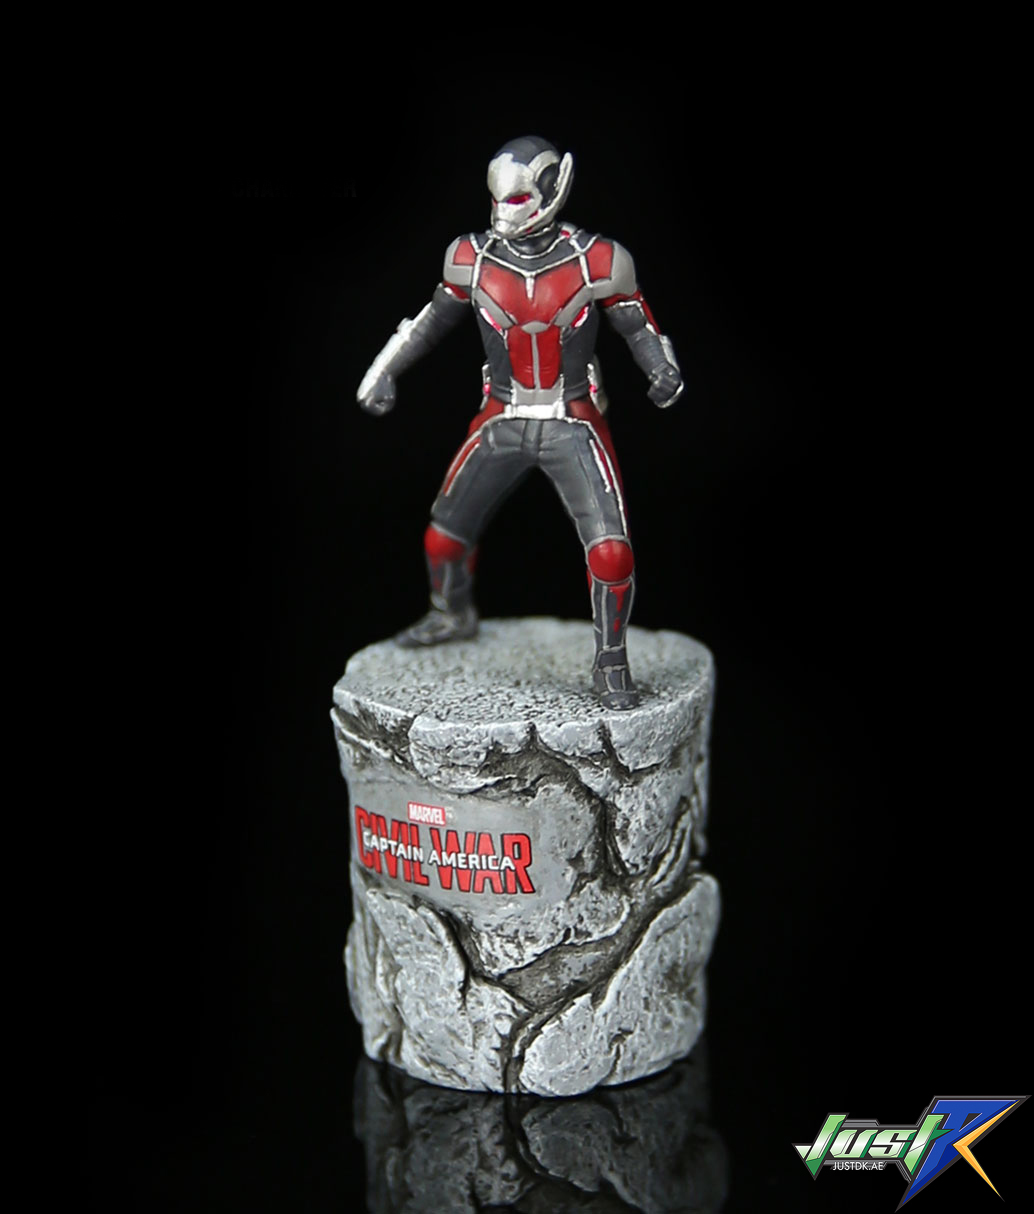 KING ARTS FFS006 KING ARTS ANT MAN POSED CHARACTER WITH STONE 6.5cm